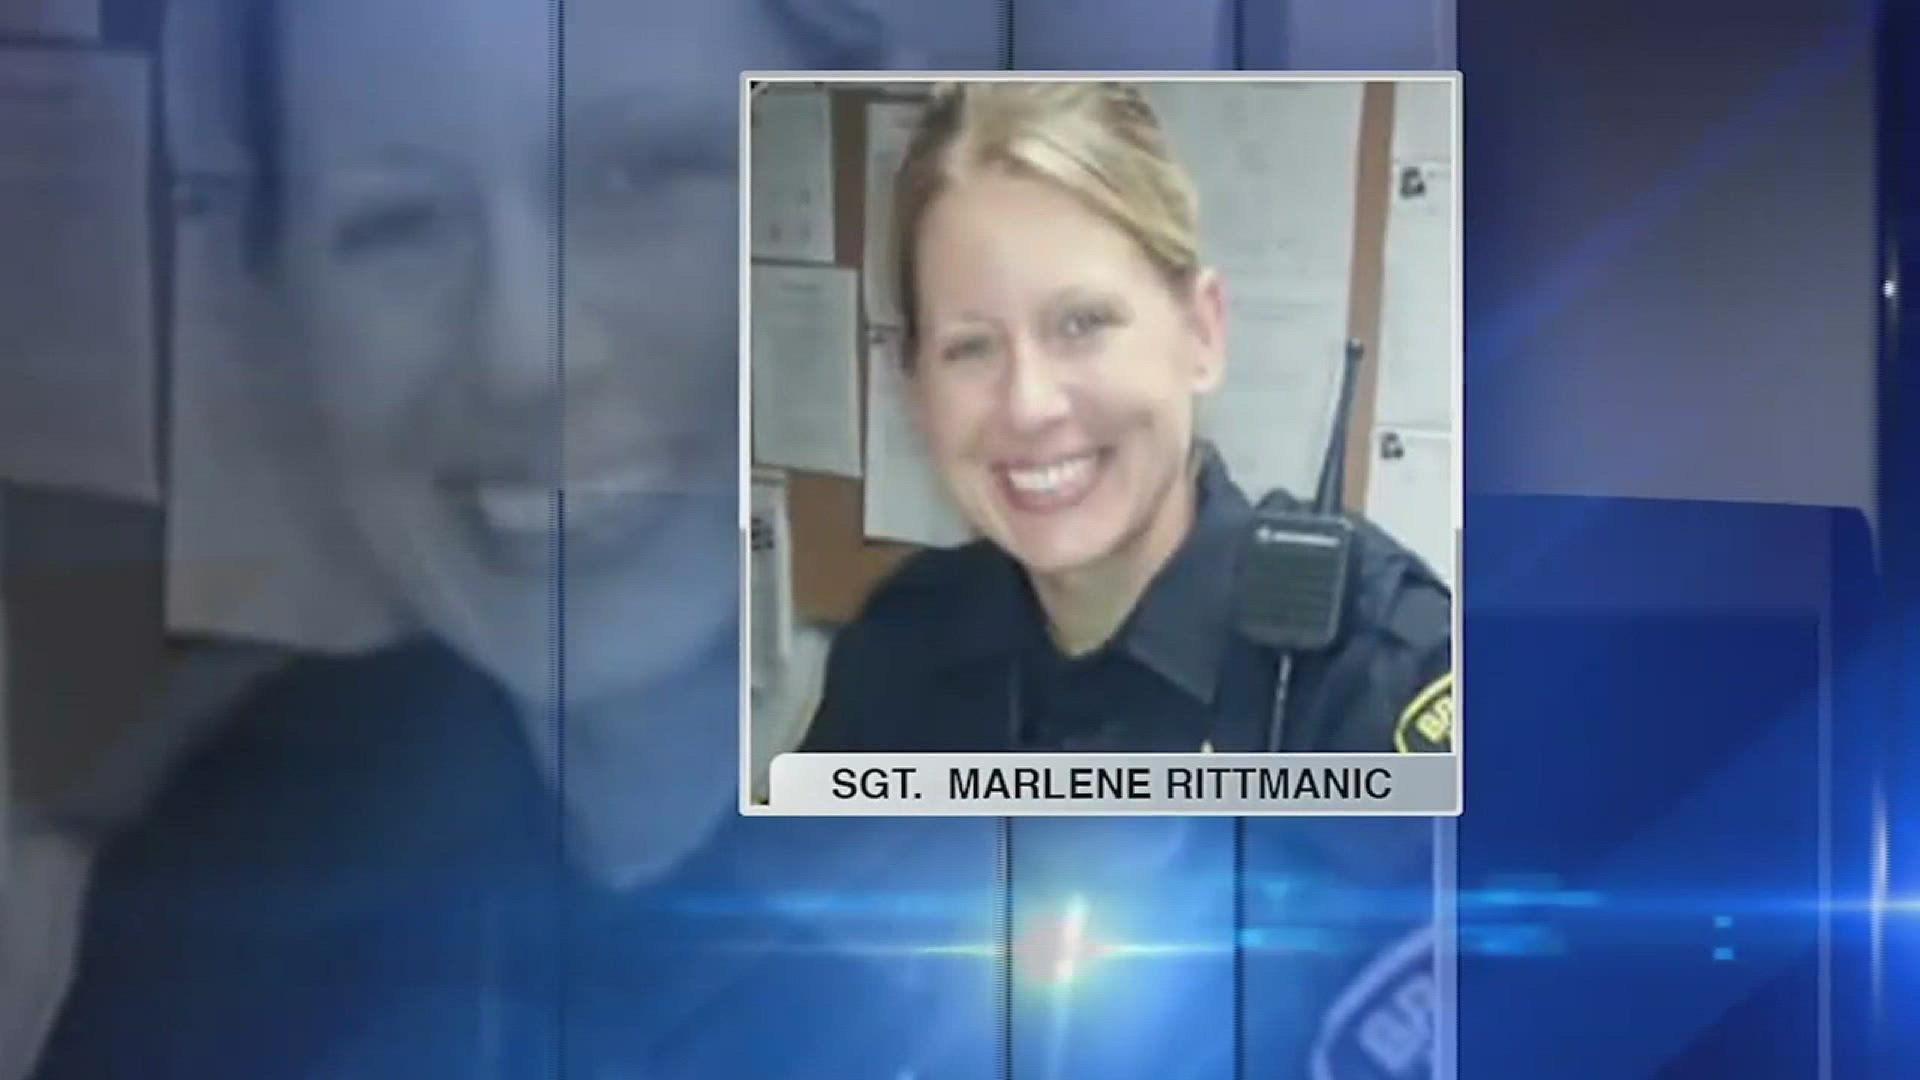 Prosecutors say one of the suspects likely shot and killed Sgt. Marlene Rittmanic with her own gun. Body camera footage showed the sergeant pleading for her life.